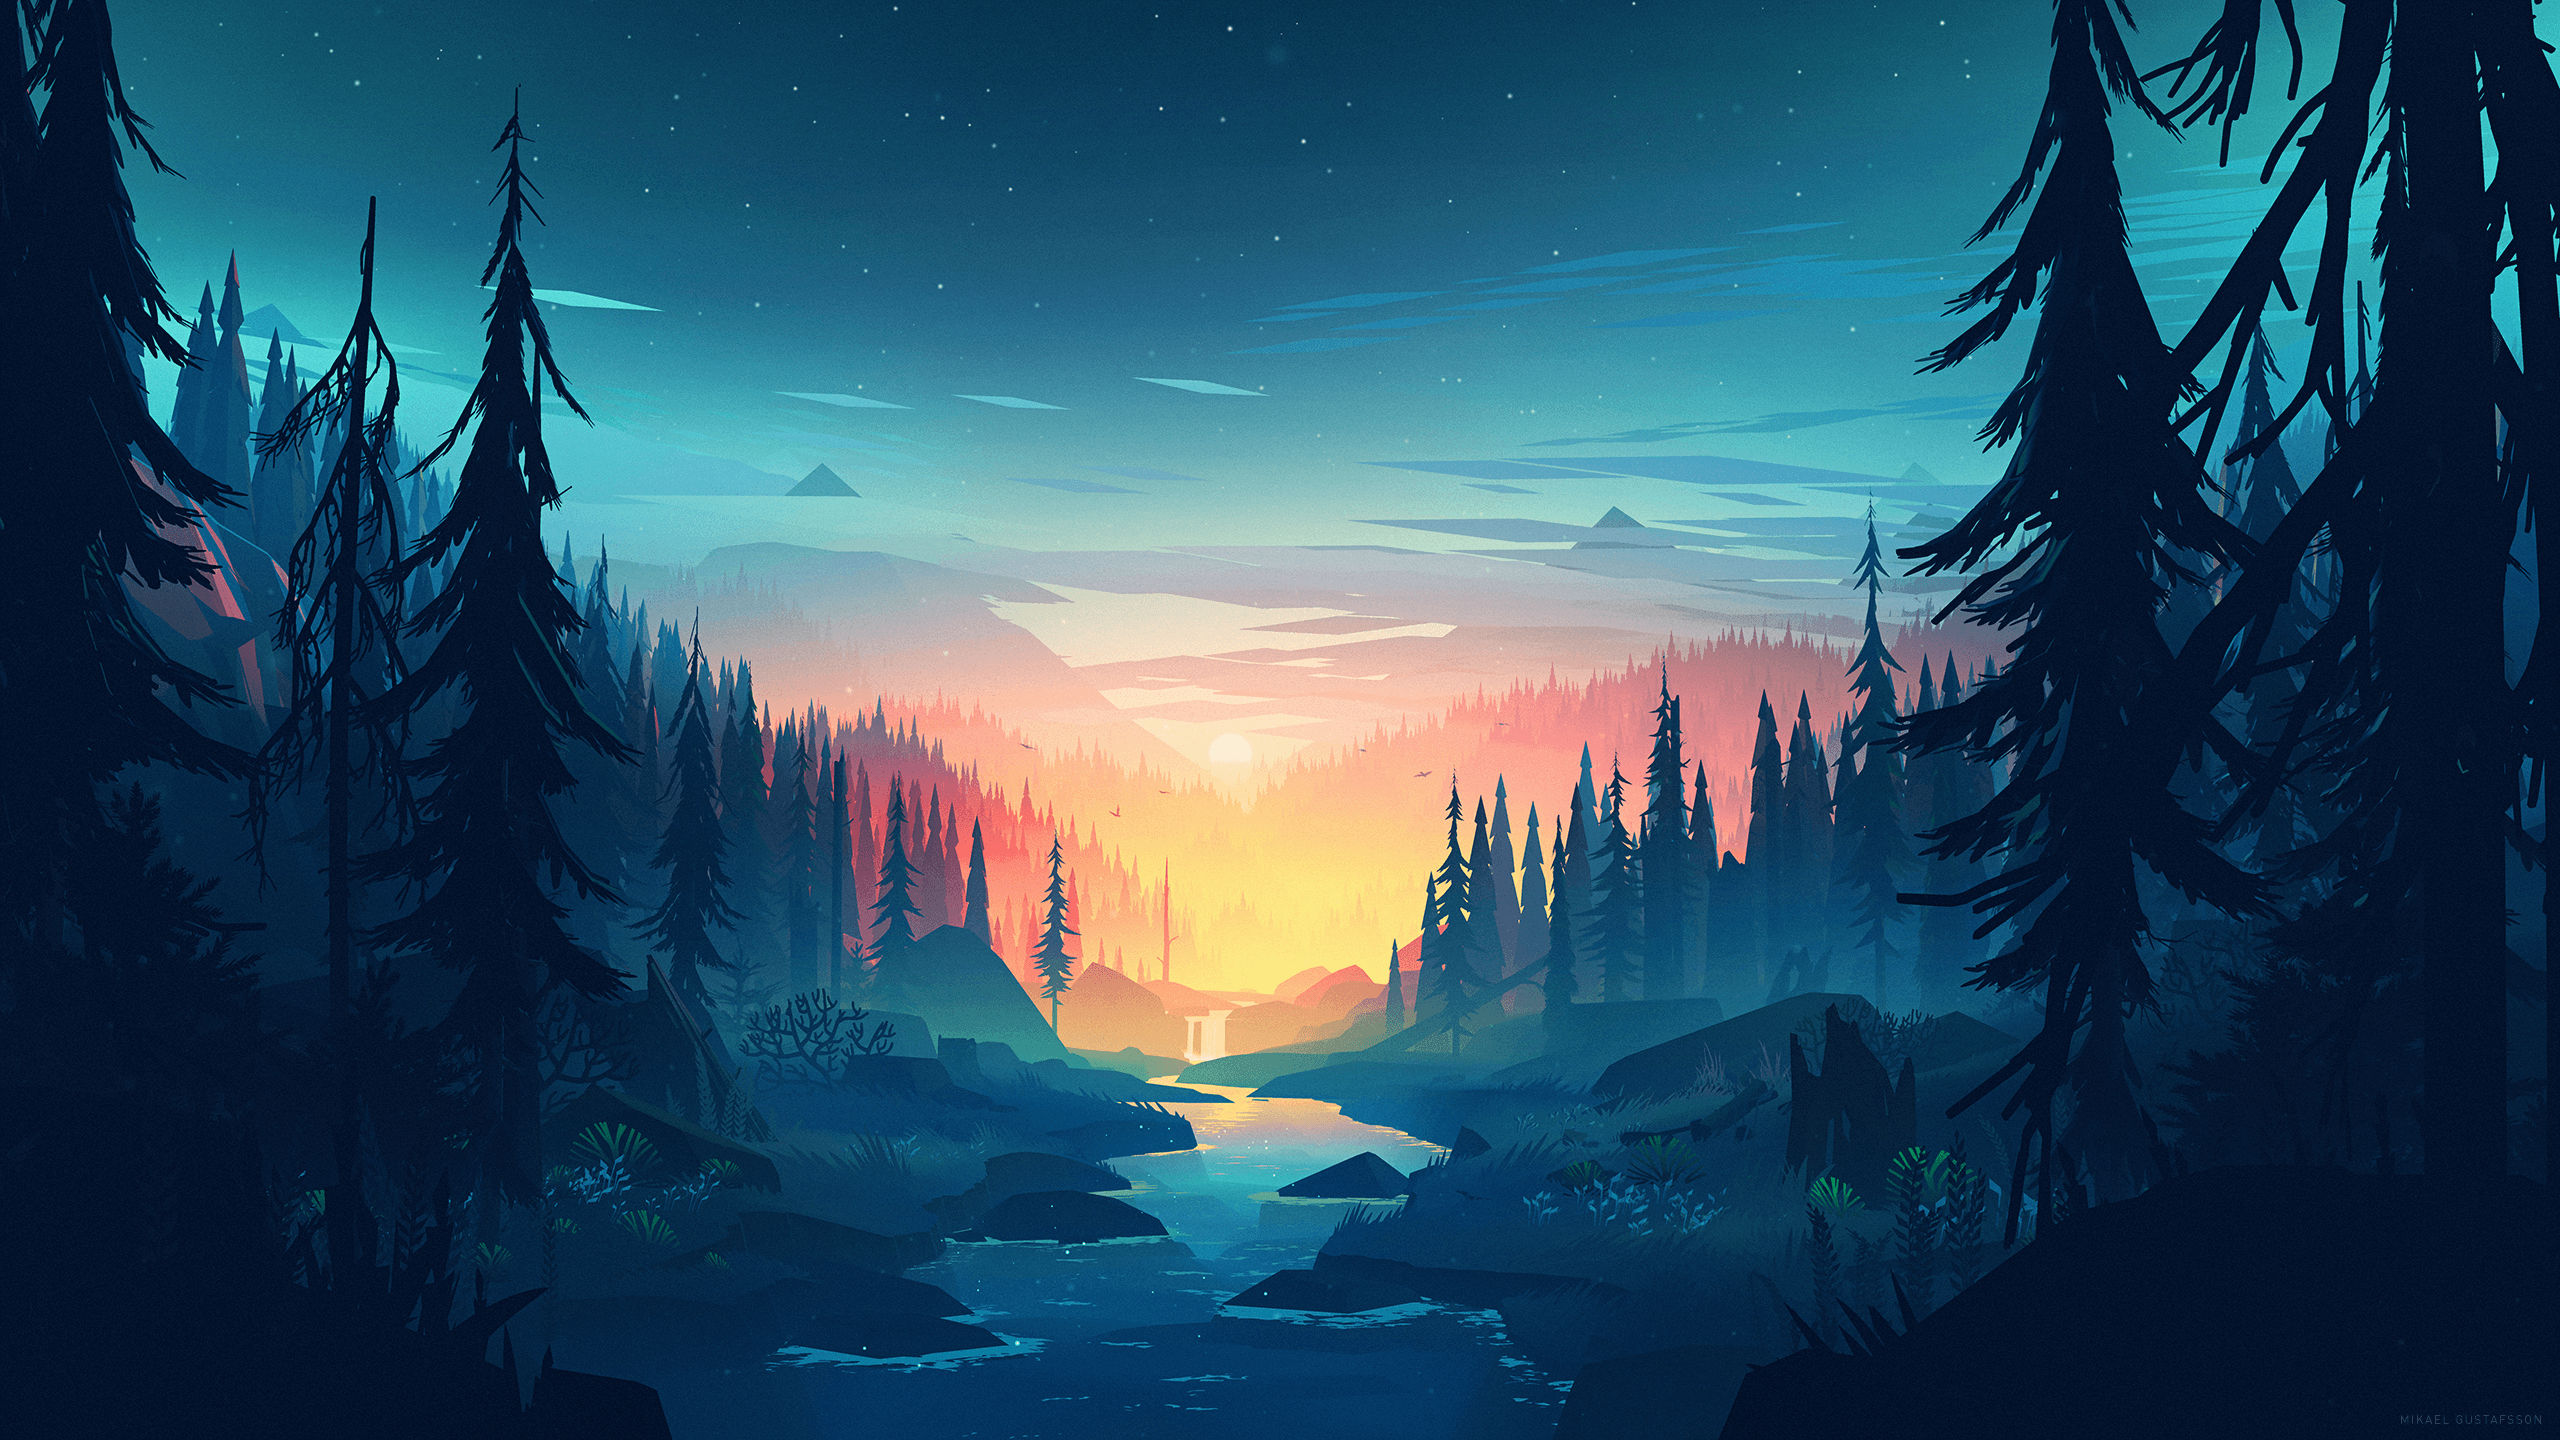 Small Memory by Mikael Gustafsson [1440p]